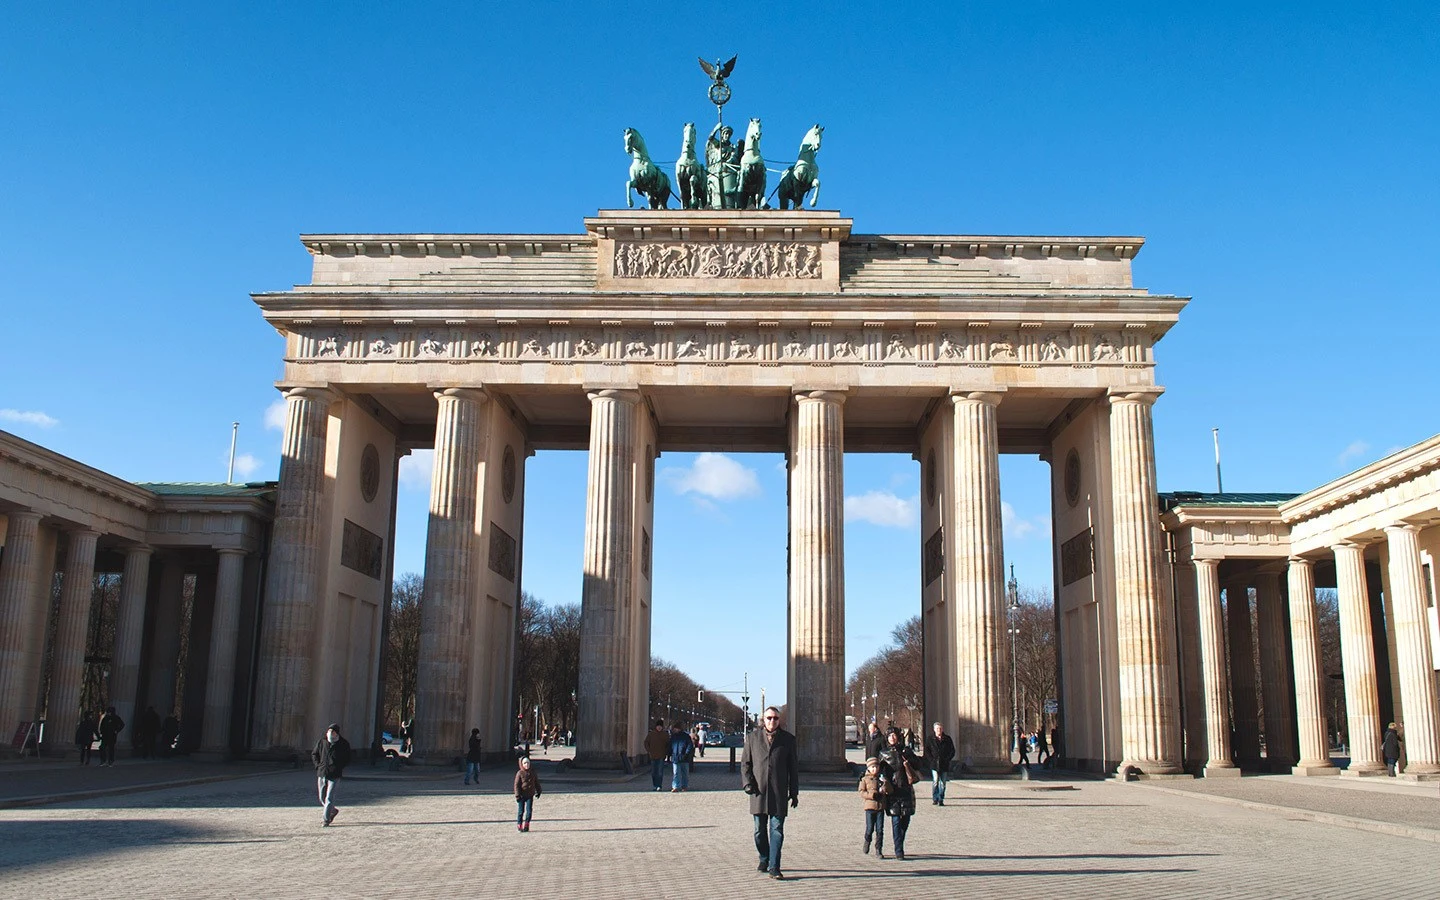 Visiting Berlin on a budget